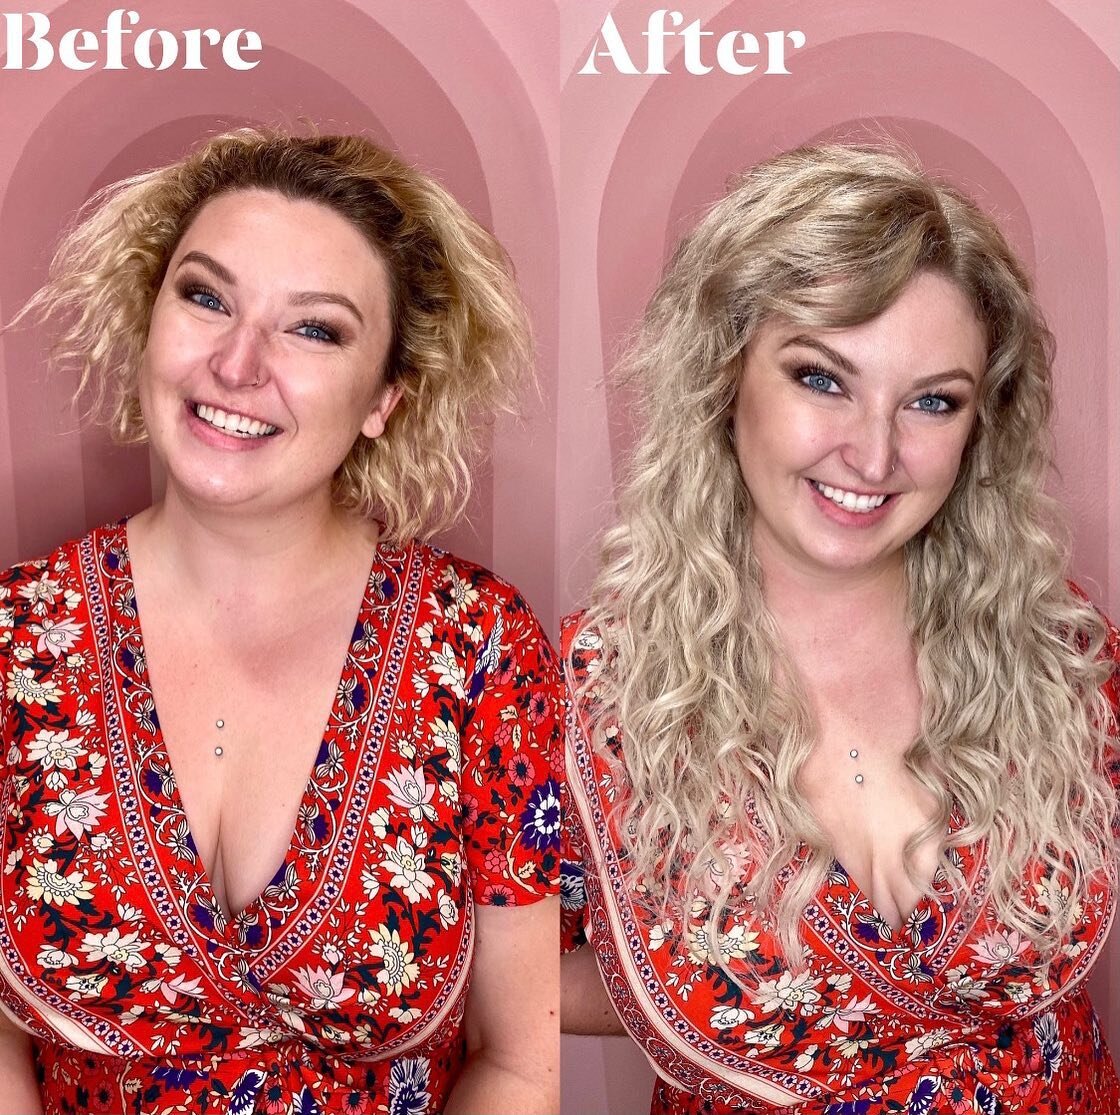 Curly girls can have hand tied extensions too! This look is brought to you by three rows of hand tied extensions, a bleach and tone with a shadow root. Doesn&rsquo;t she look incredible? 
@dreamboathairstudio 
.
.
.
.
.
.
.
.
.
#curlyhair #curlyexten